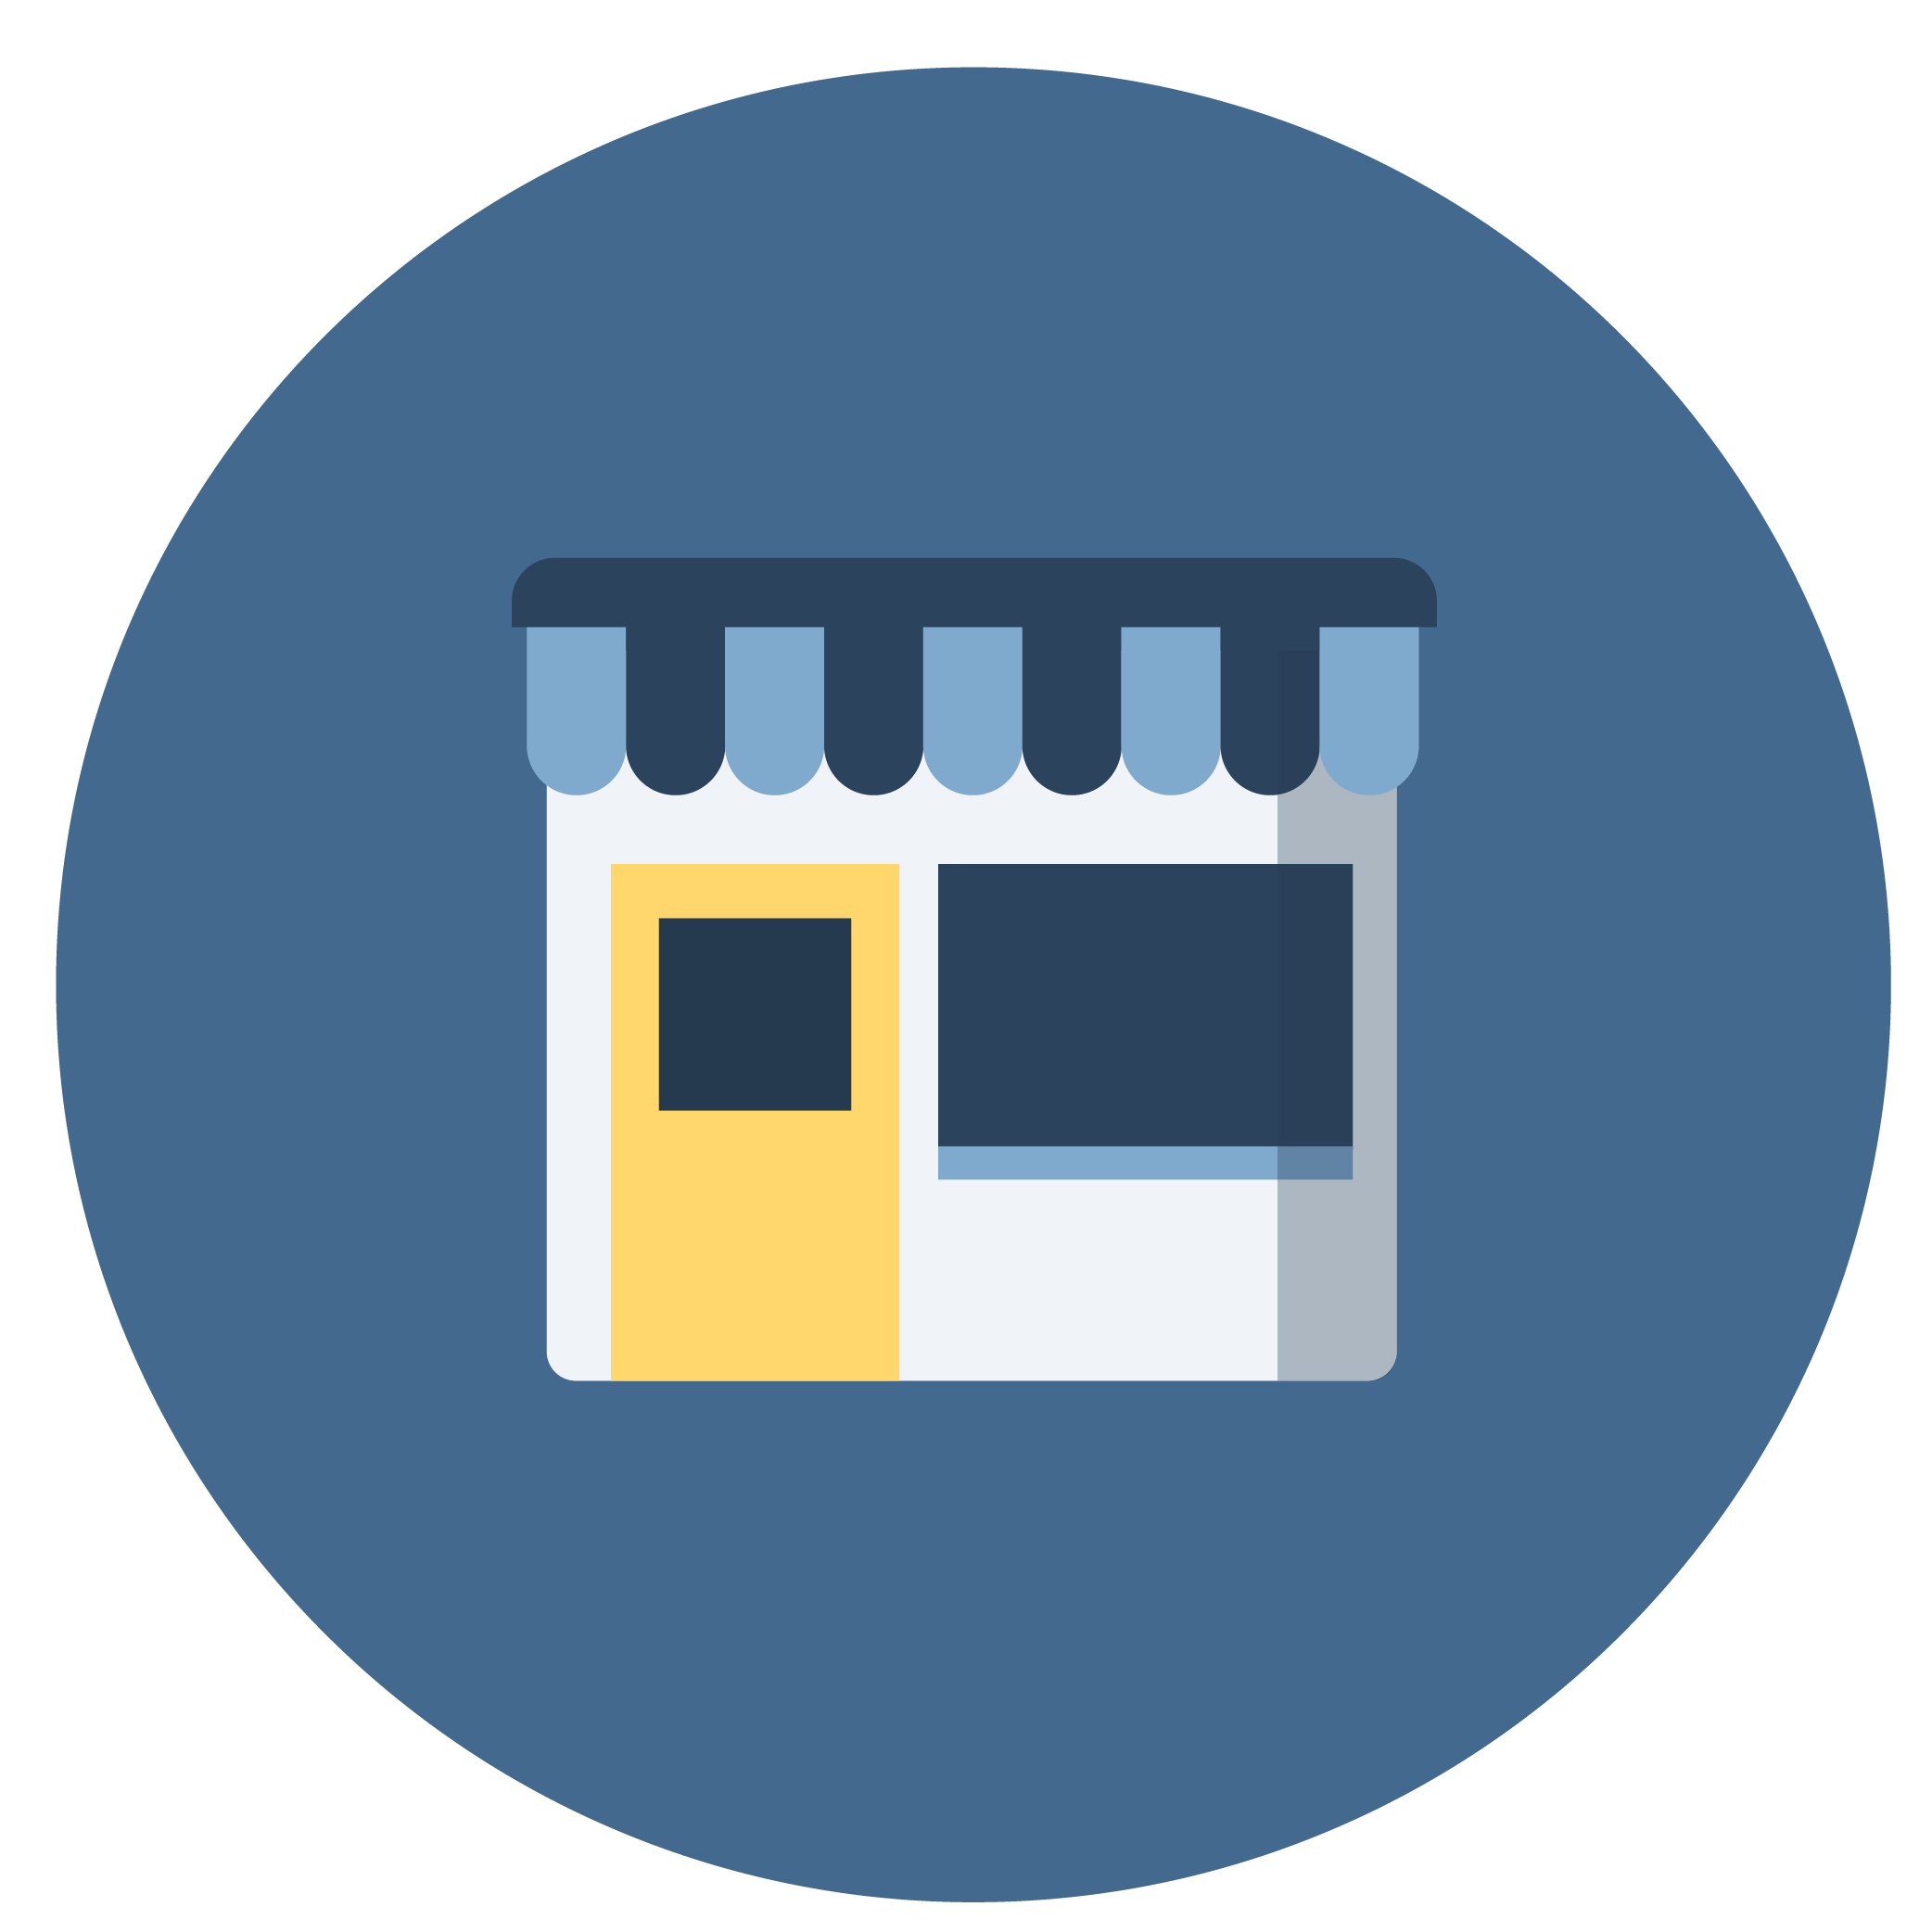 Small business storefront icon